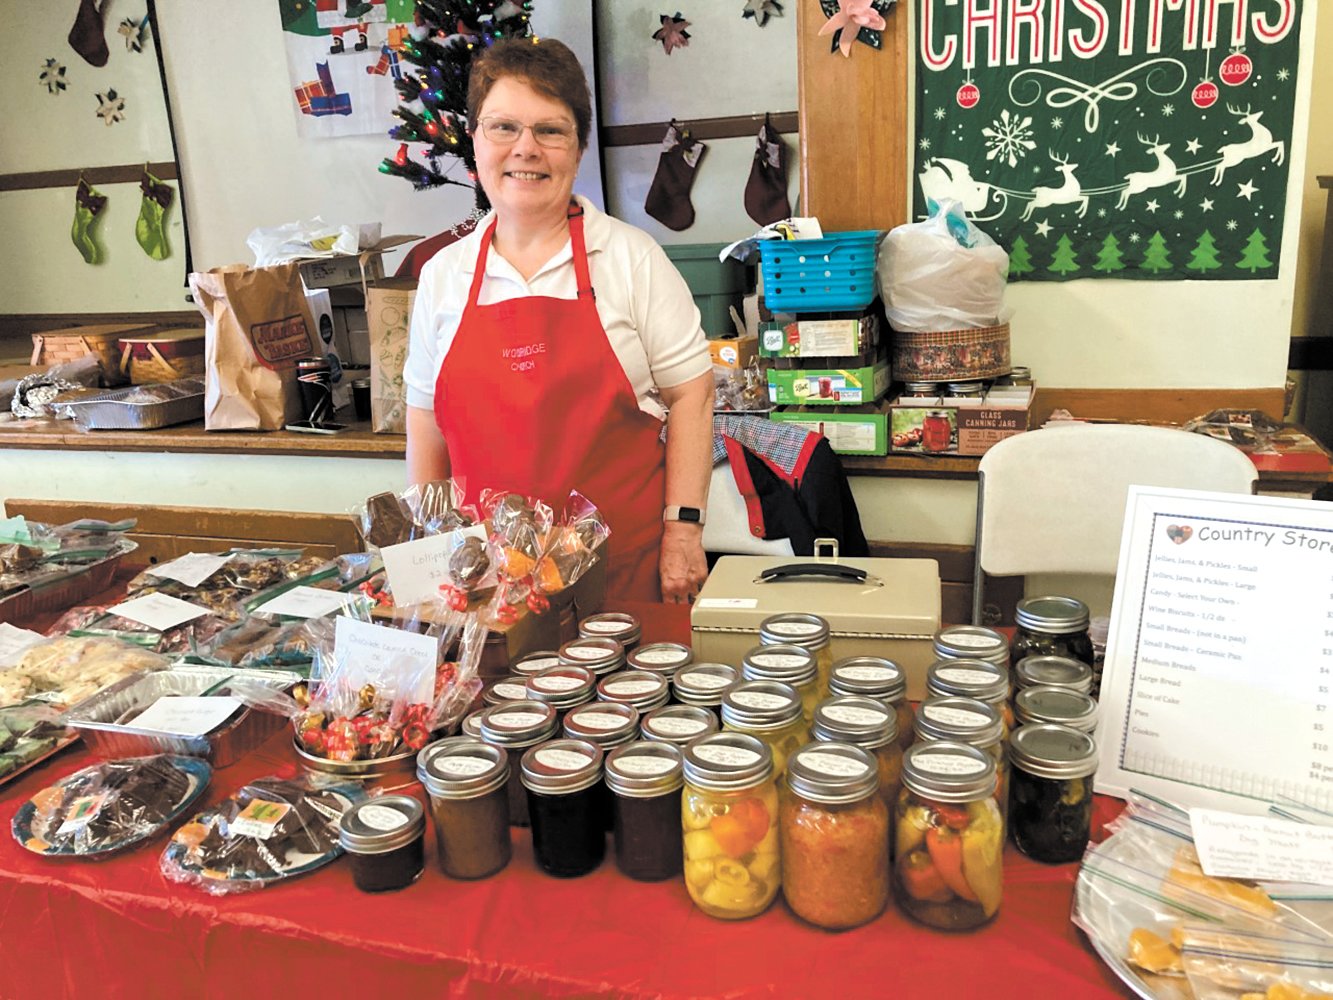 FOR THE FOODIES: If you were looking for a tasty selection of goodies on Saturday, parishioner Debbie Therrien had you covered at the church’s country store section. An assortment of fudge, jams, pickles, pies, breads and homemade dog biscuits were among the fast-selling items.